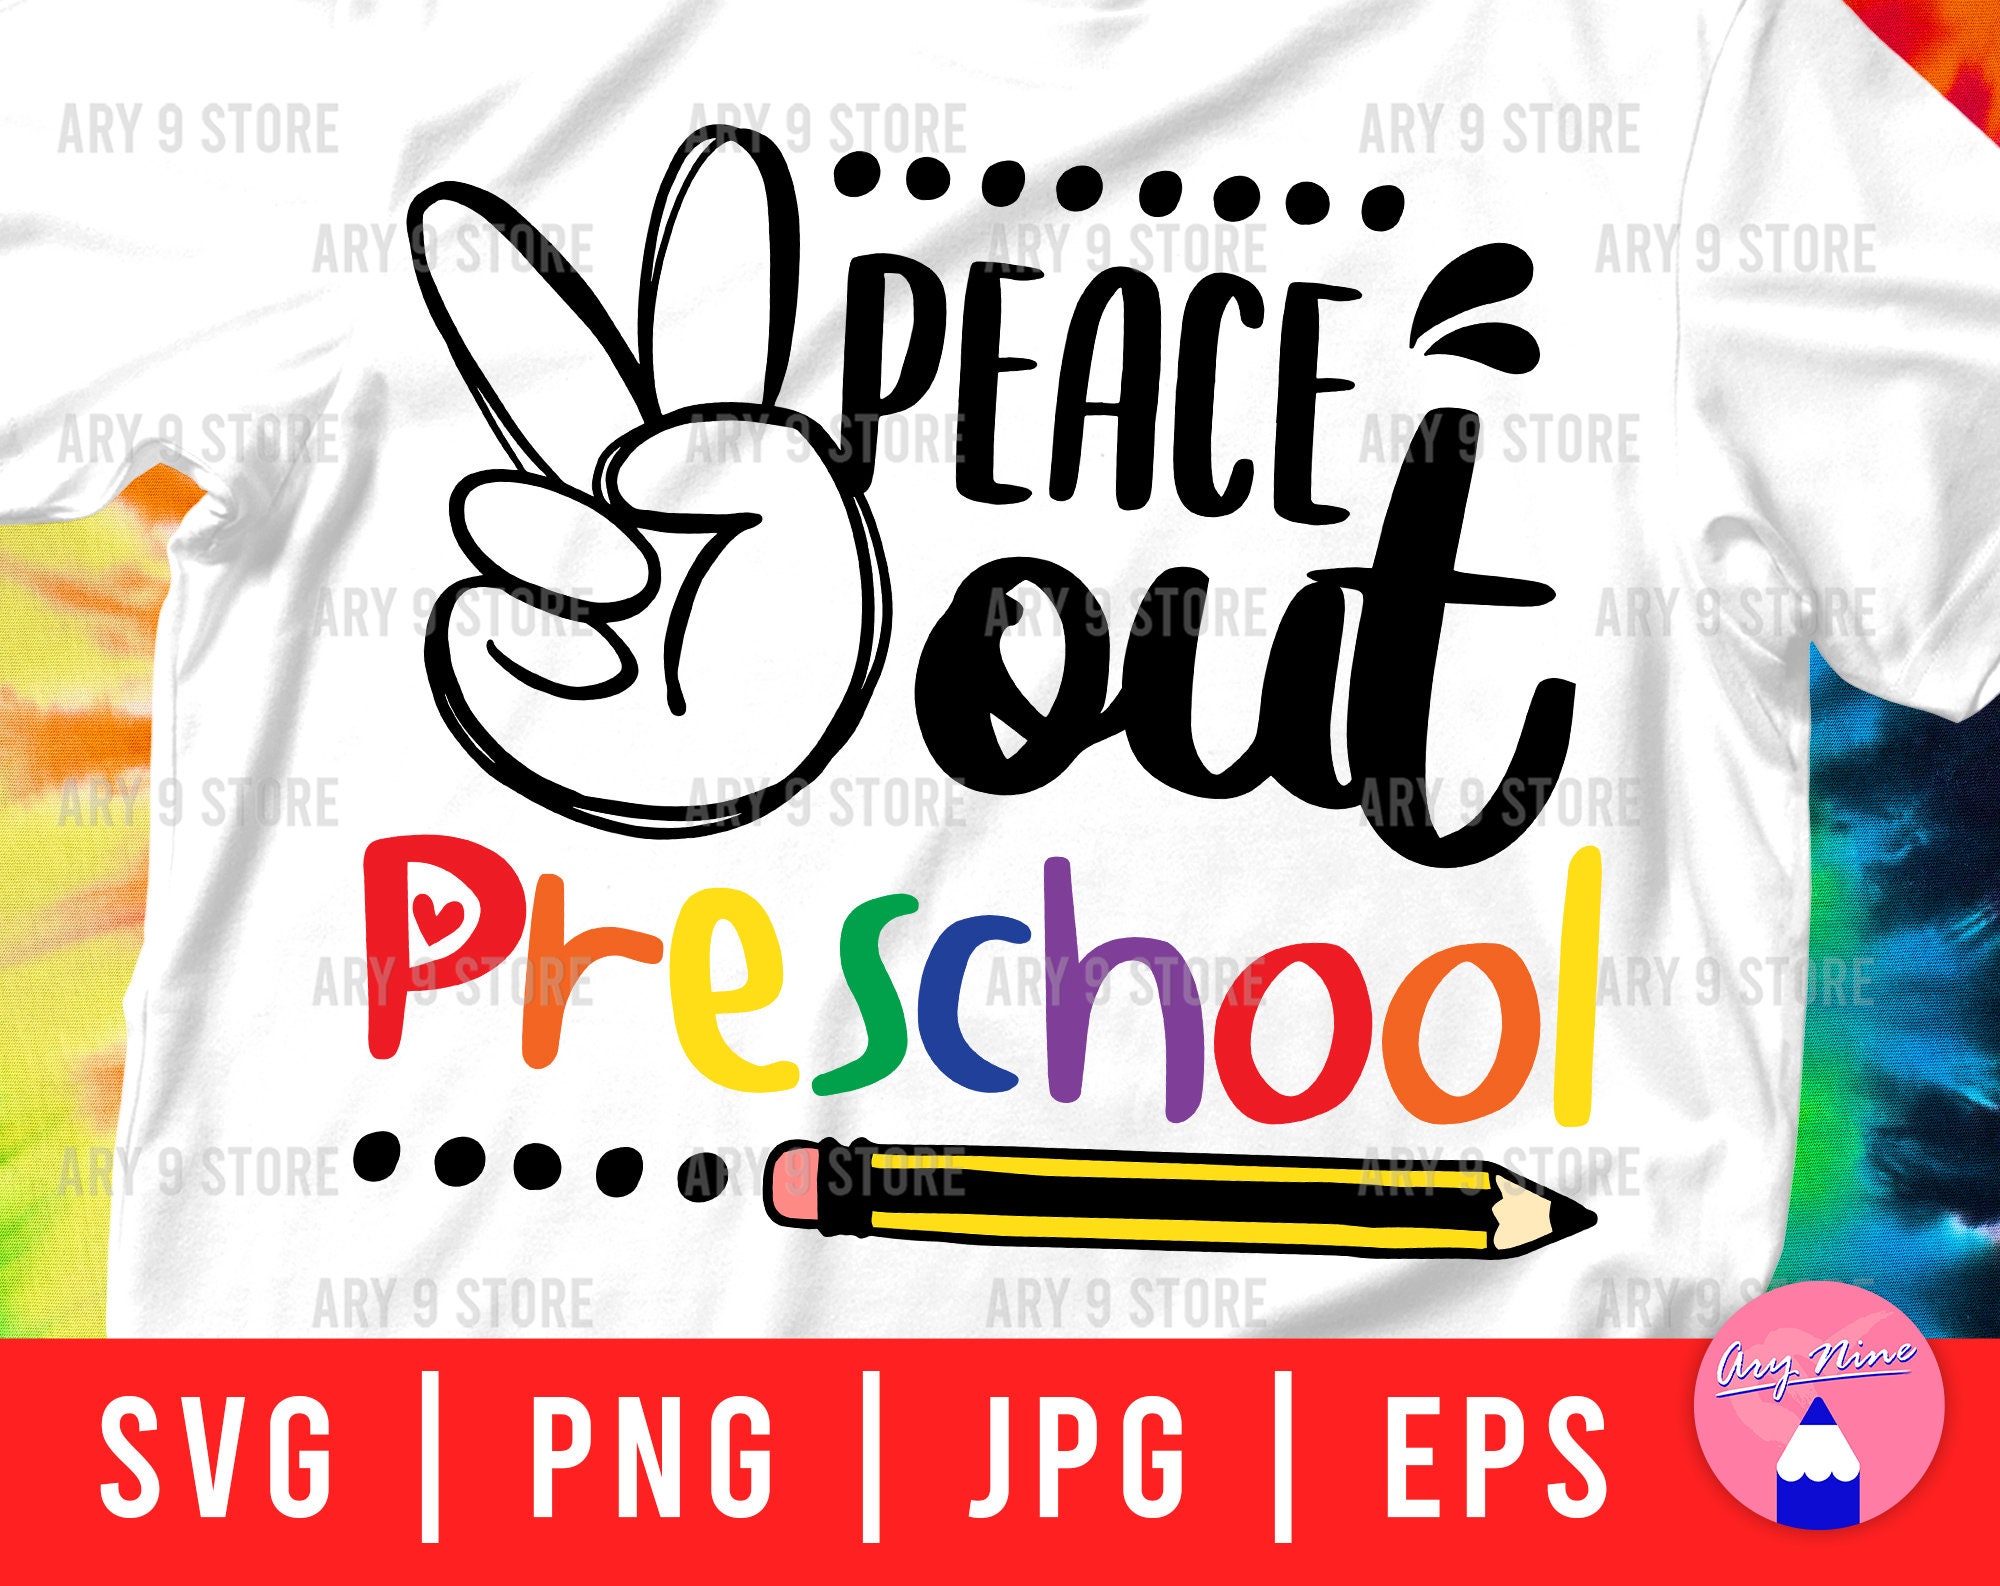 Peace Out Preschool Svg Png Eps Jpg Files Peace Love | Etsy